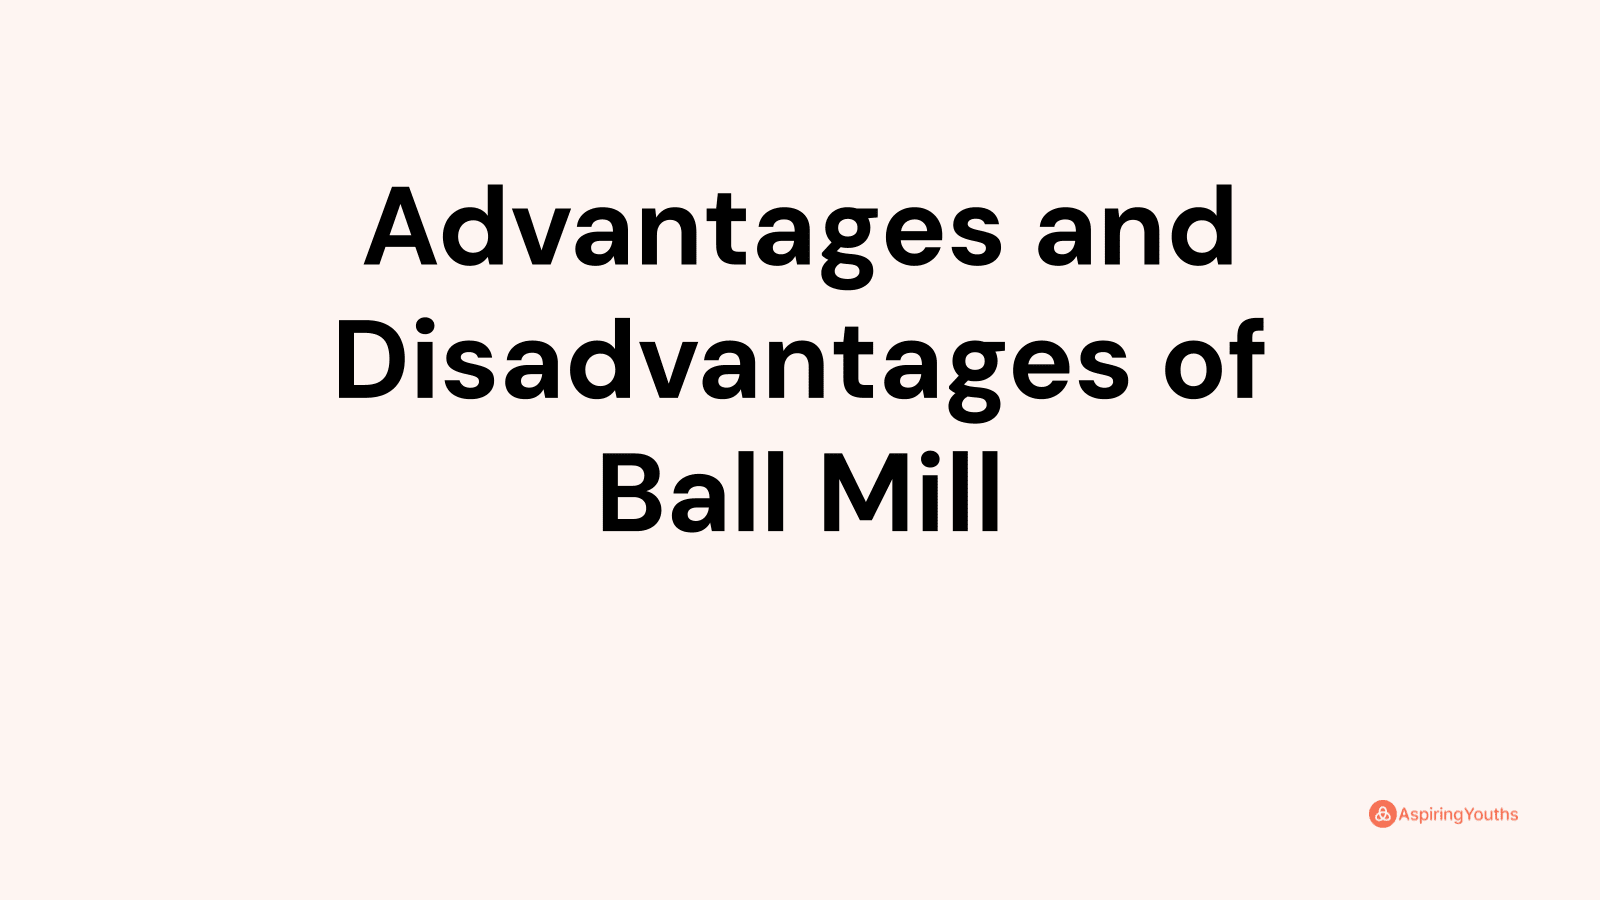 Advantages and disadvantages of Ball Mill